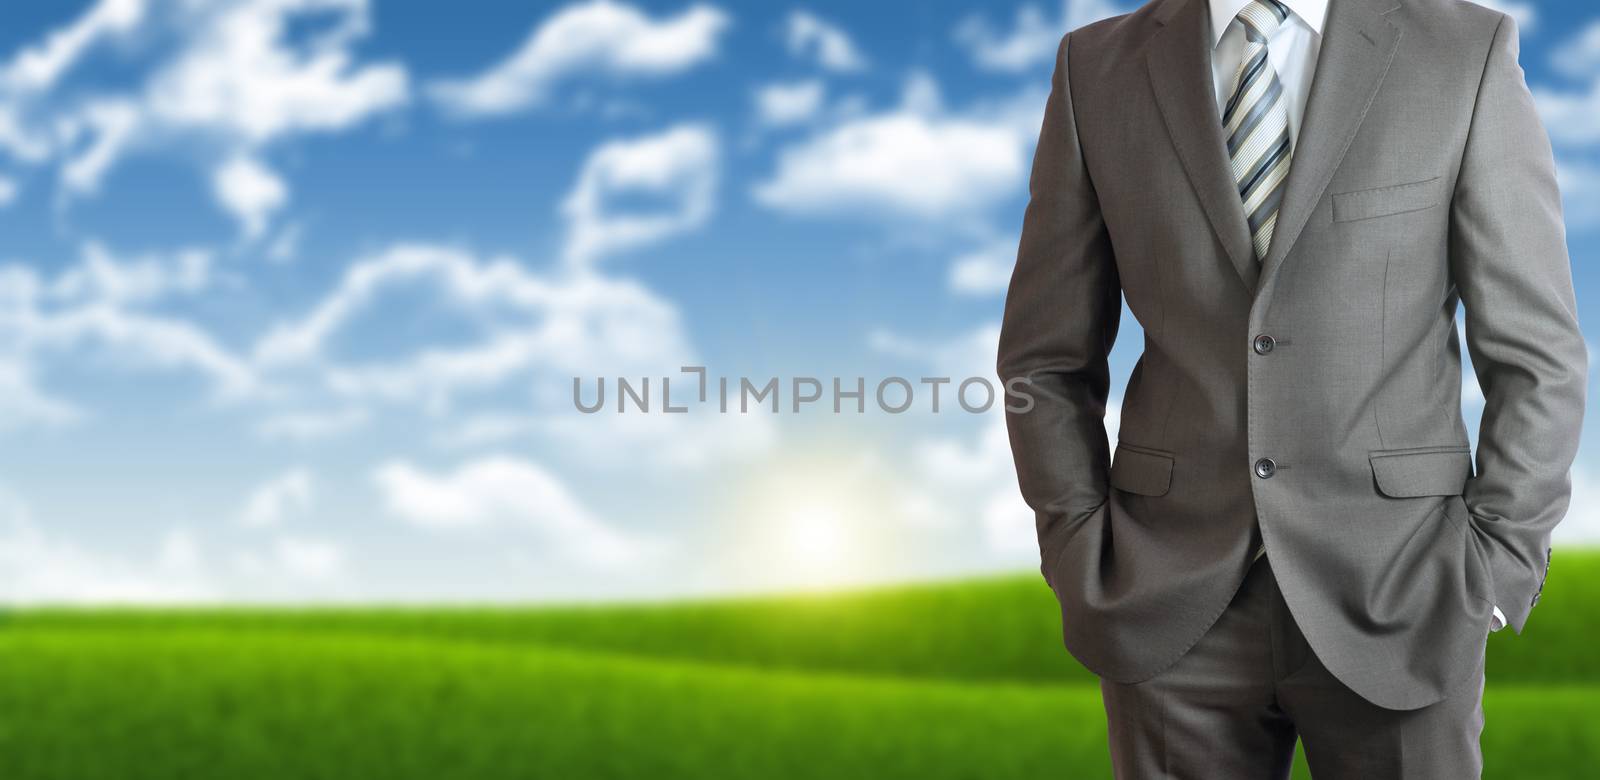 Businessman standing with hands in pockets. Blue sky and green grass as backdrop